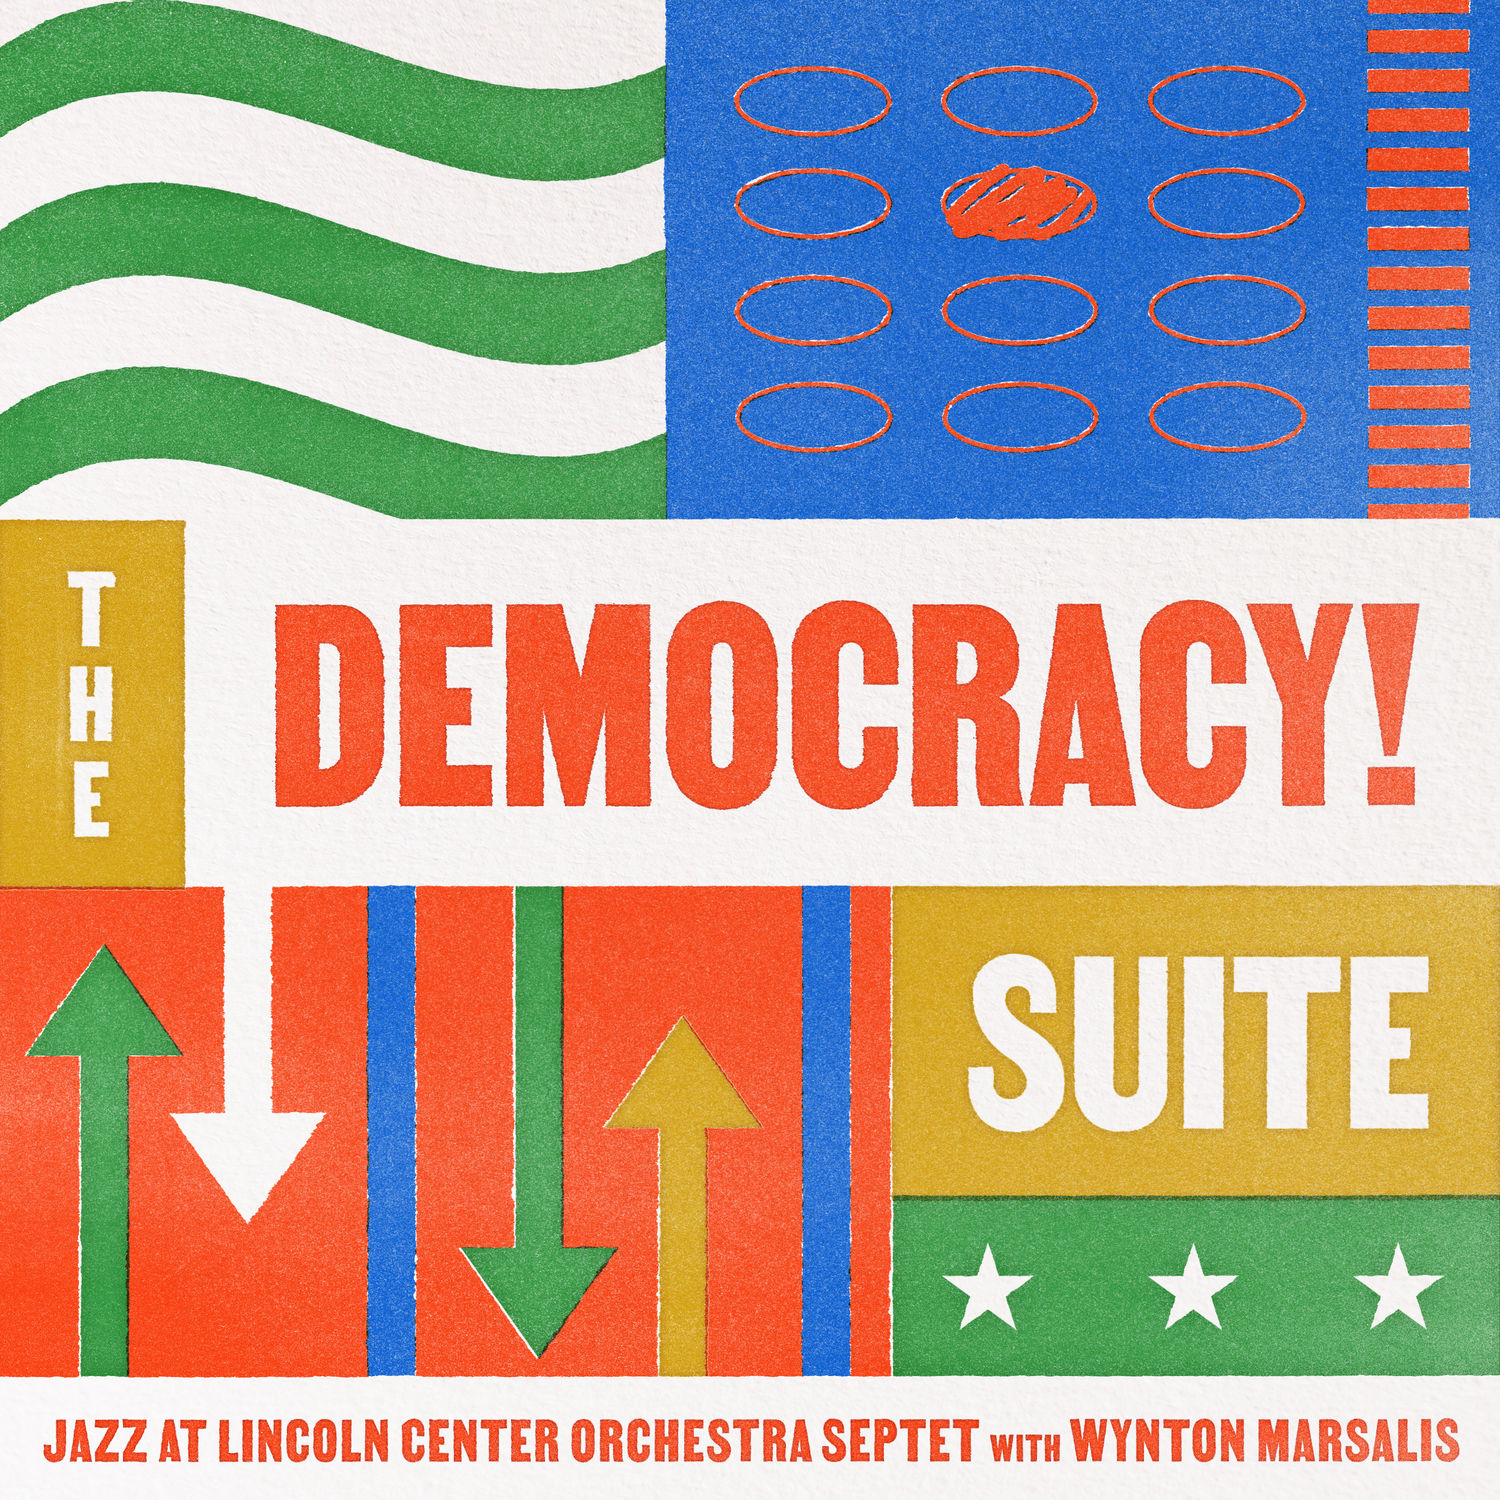 Jazz at Lincoln Center Orchestra Septet with Wynton Marsalis – The Democracy! Suite (2021) [FLAC 24bit/96kHz]